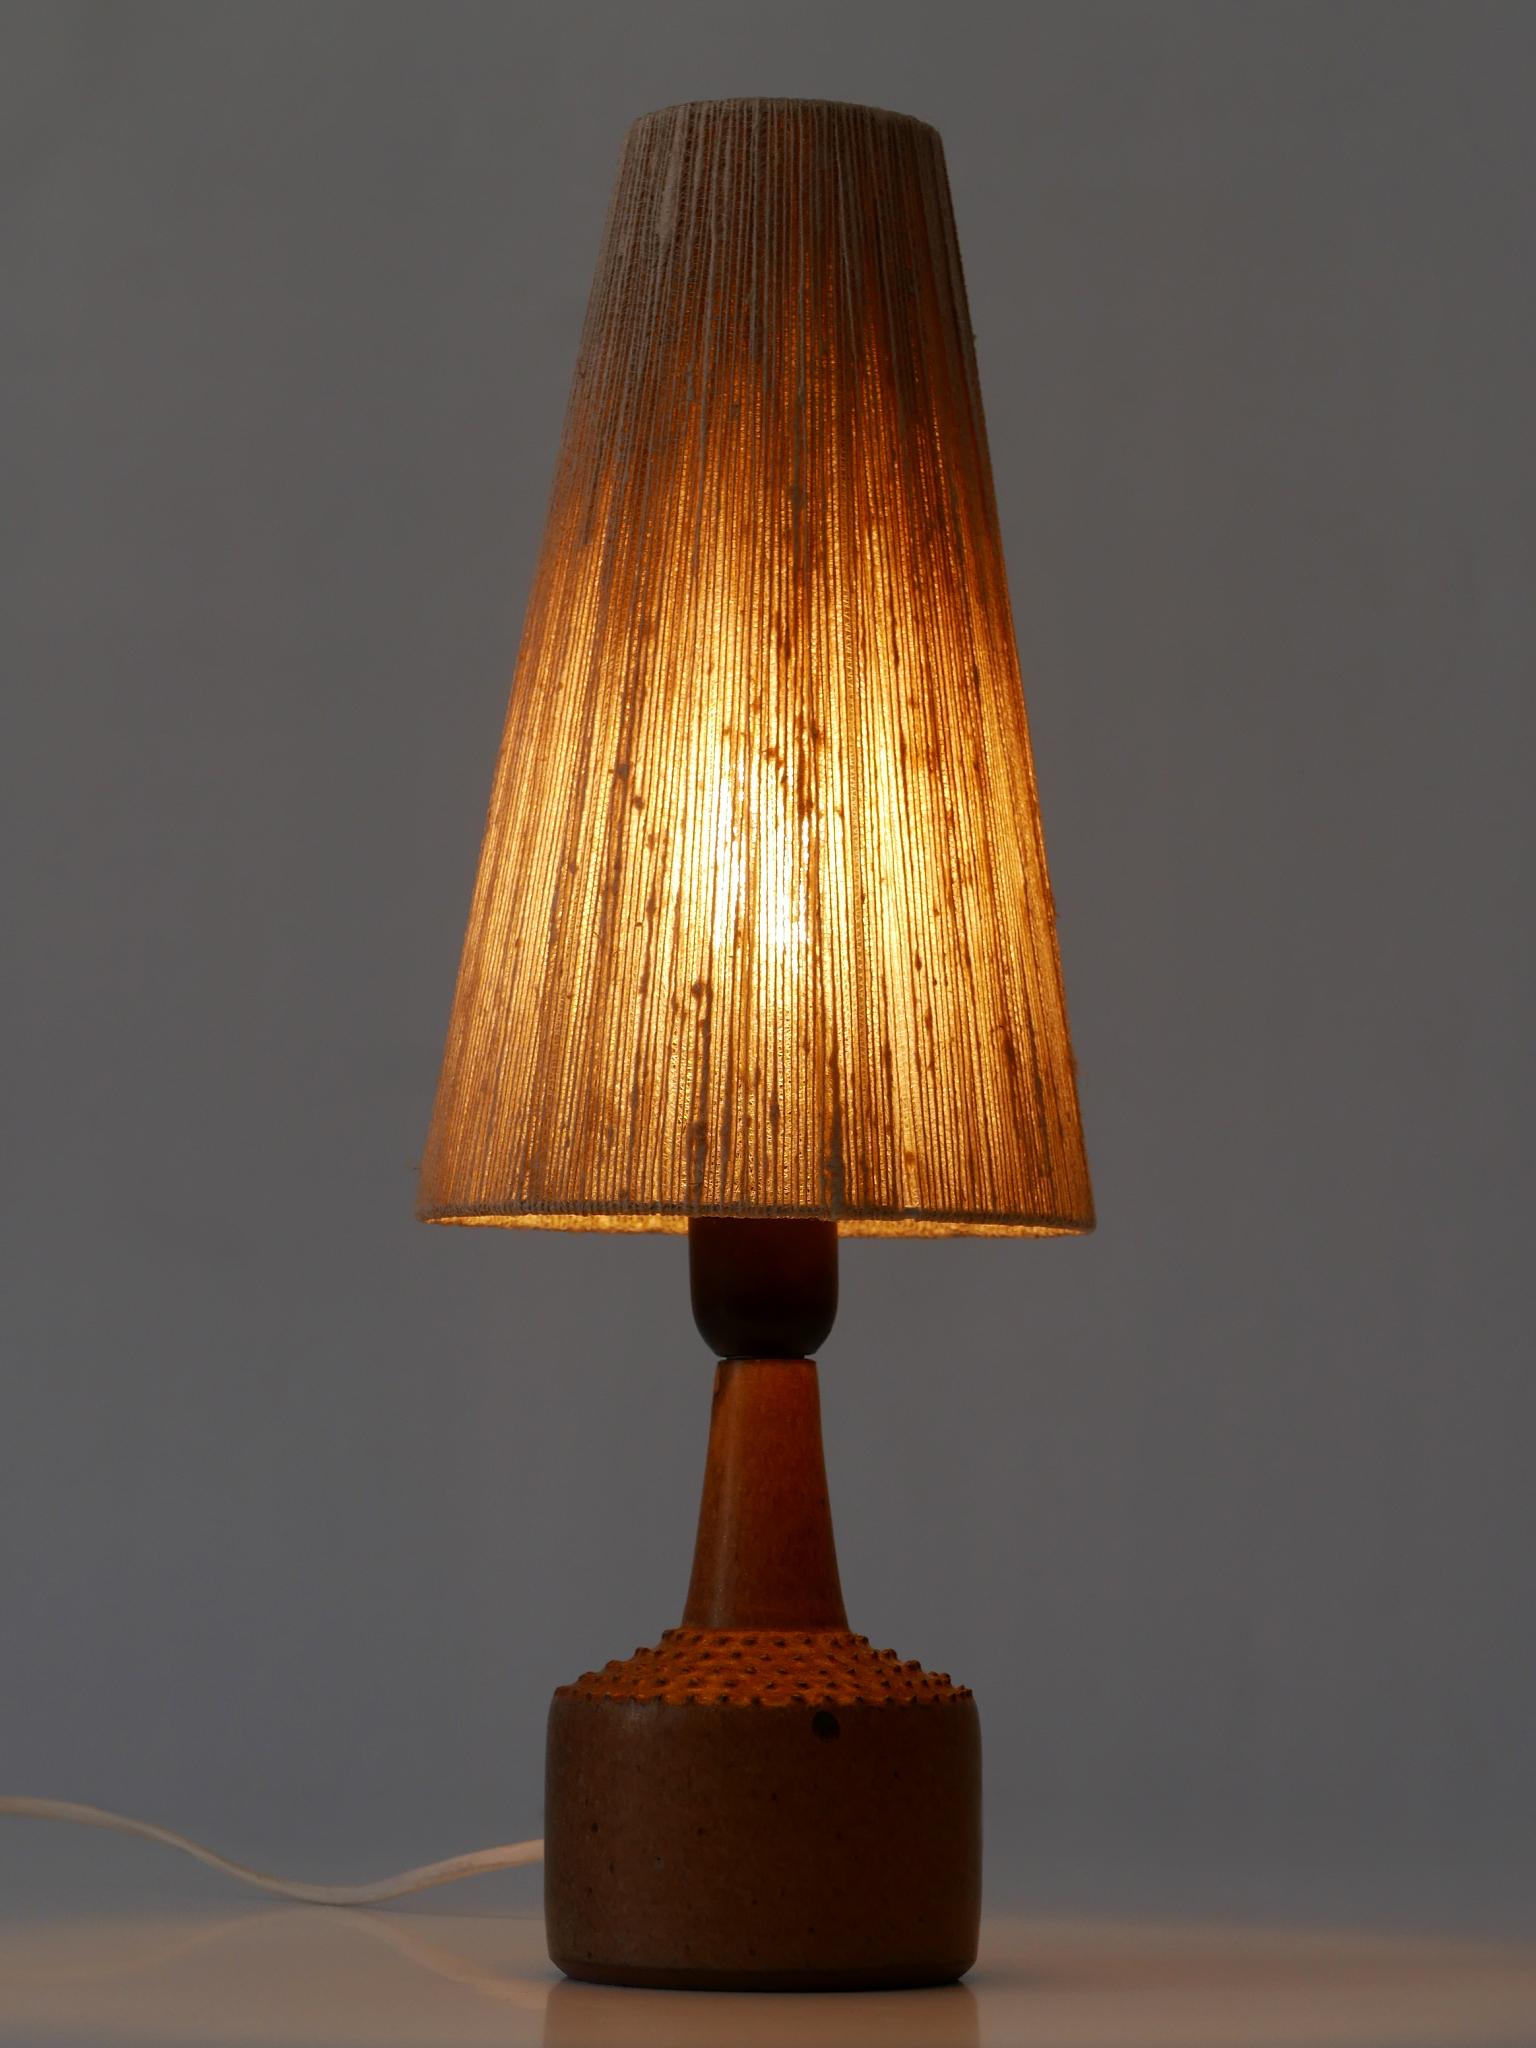 Rare and elegant Mid-Century Modern table lamp with original linen lamp shade. Designed by Rolf Palm for Mölle, Sweden, 1962. Signed and dated to the bottom of the base.

Executed in glazed stoneware and linen, the table lamp comes with 1 x E27 /